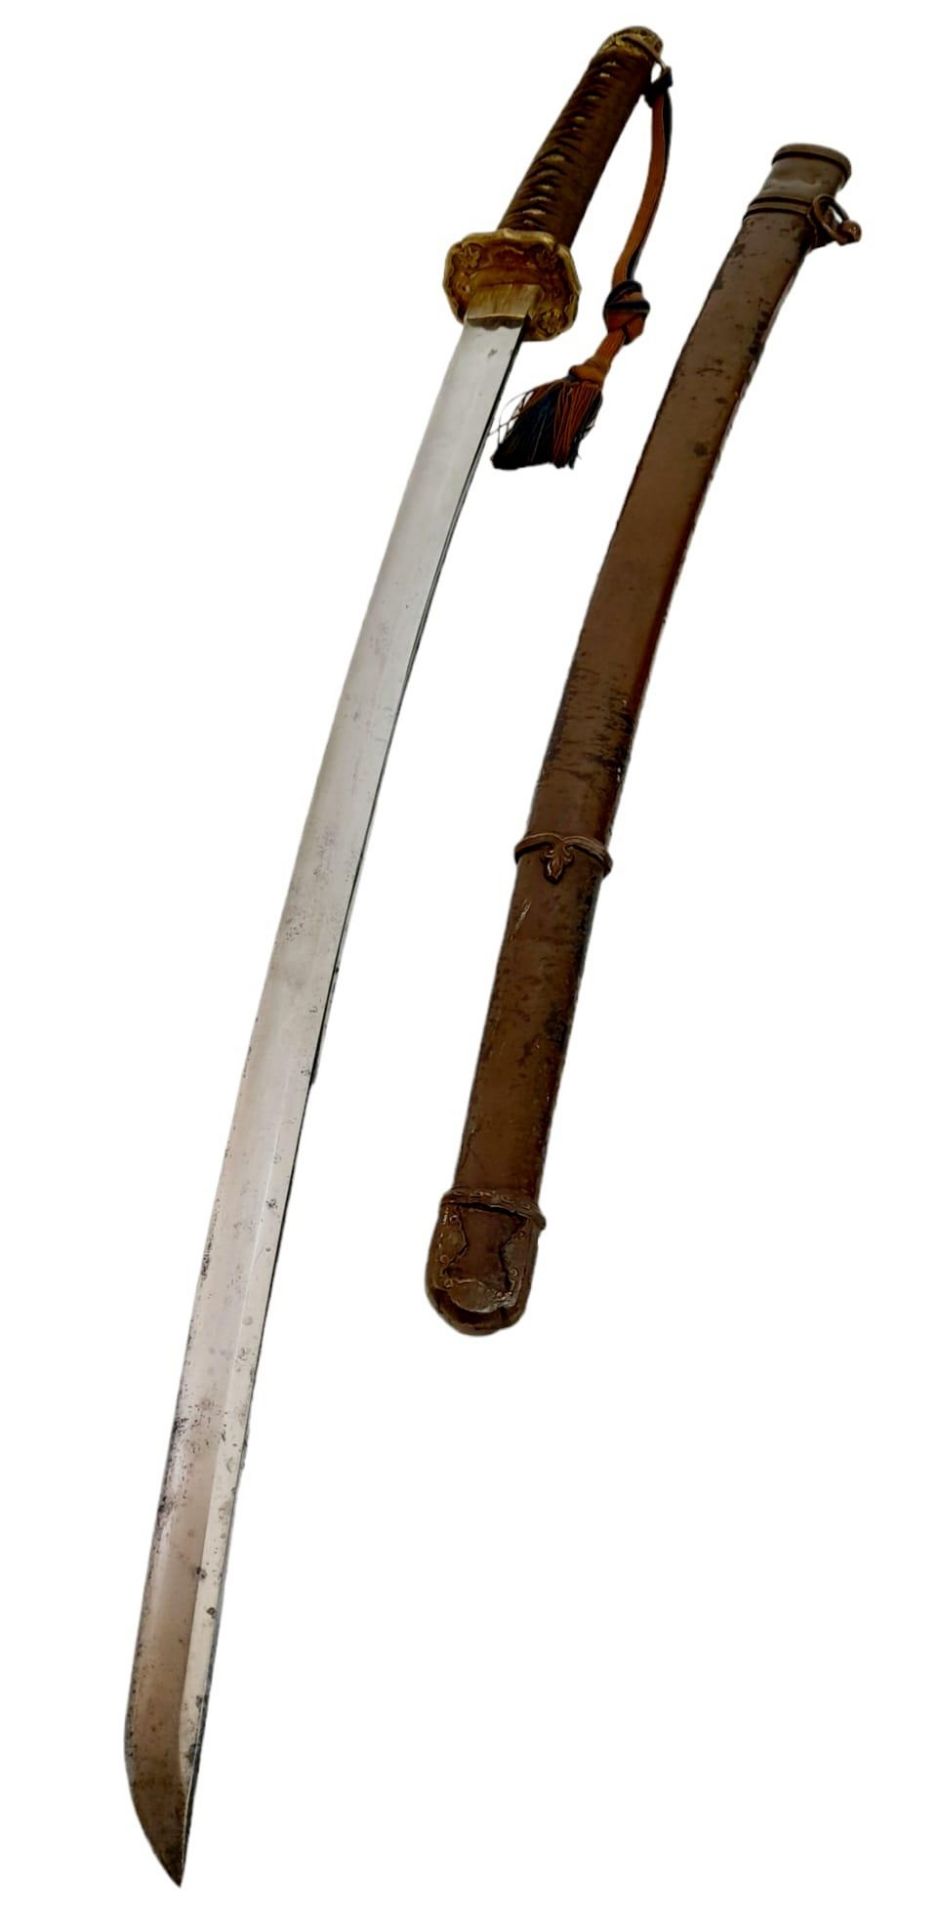 WW2 Japanese Officers Sword with ancient family blade. The sword is in the more robust metal